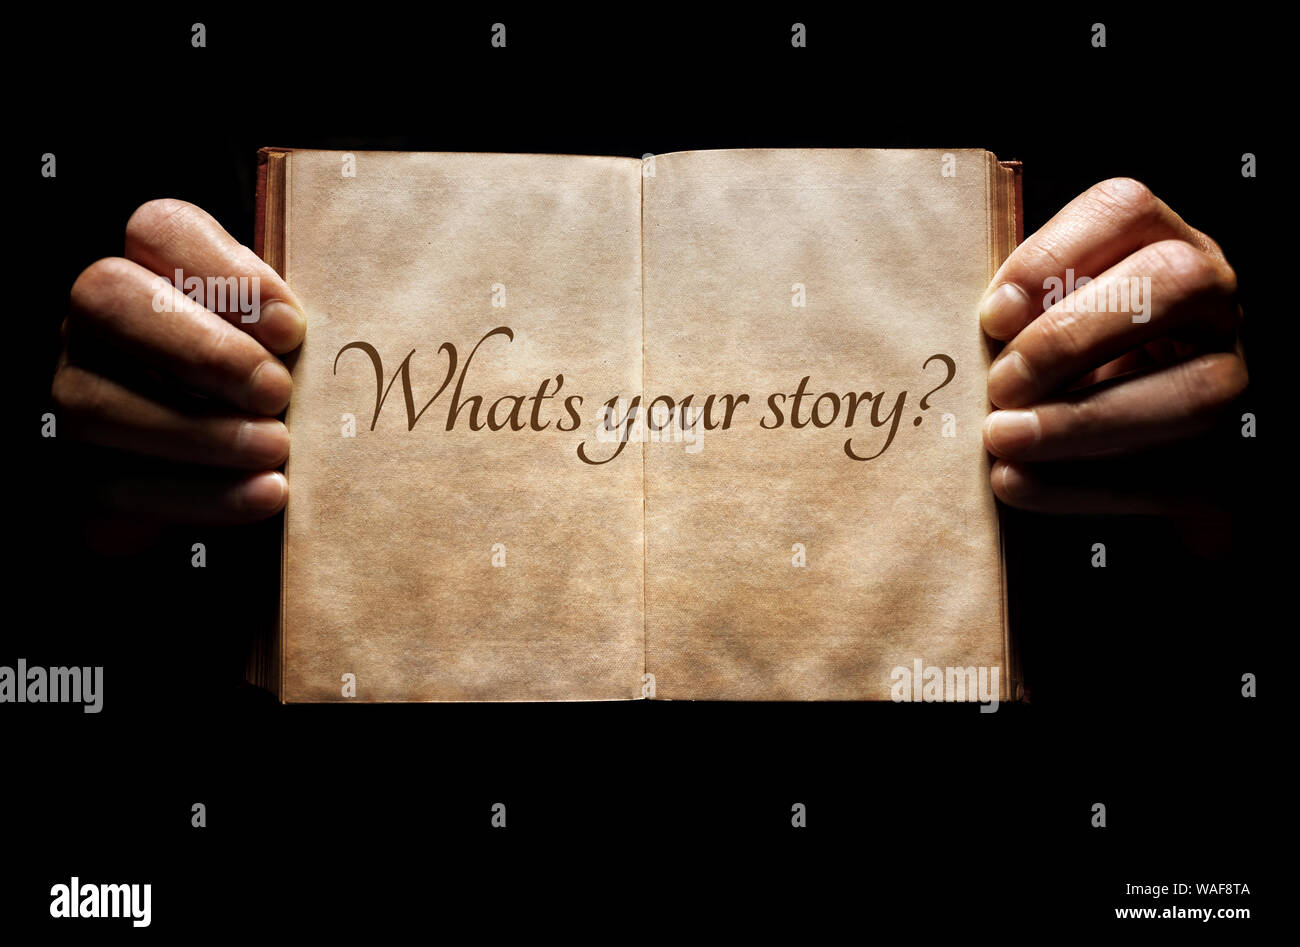 What's your story? hands holding an open book background message Stock Photo